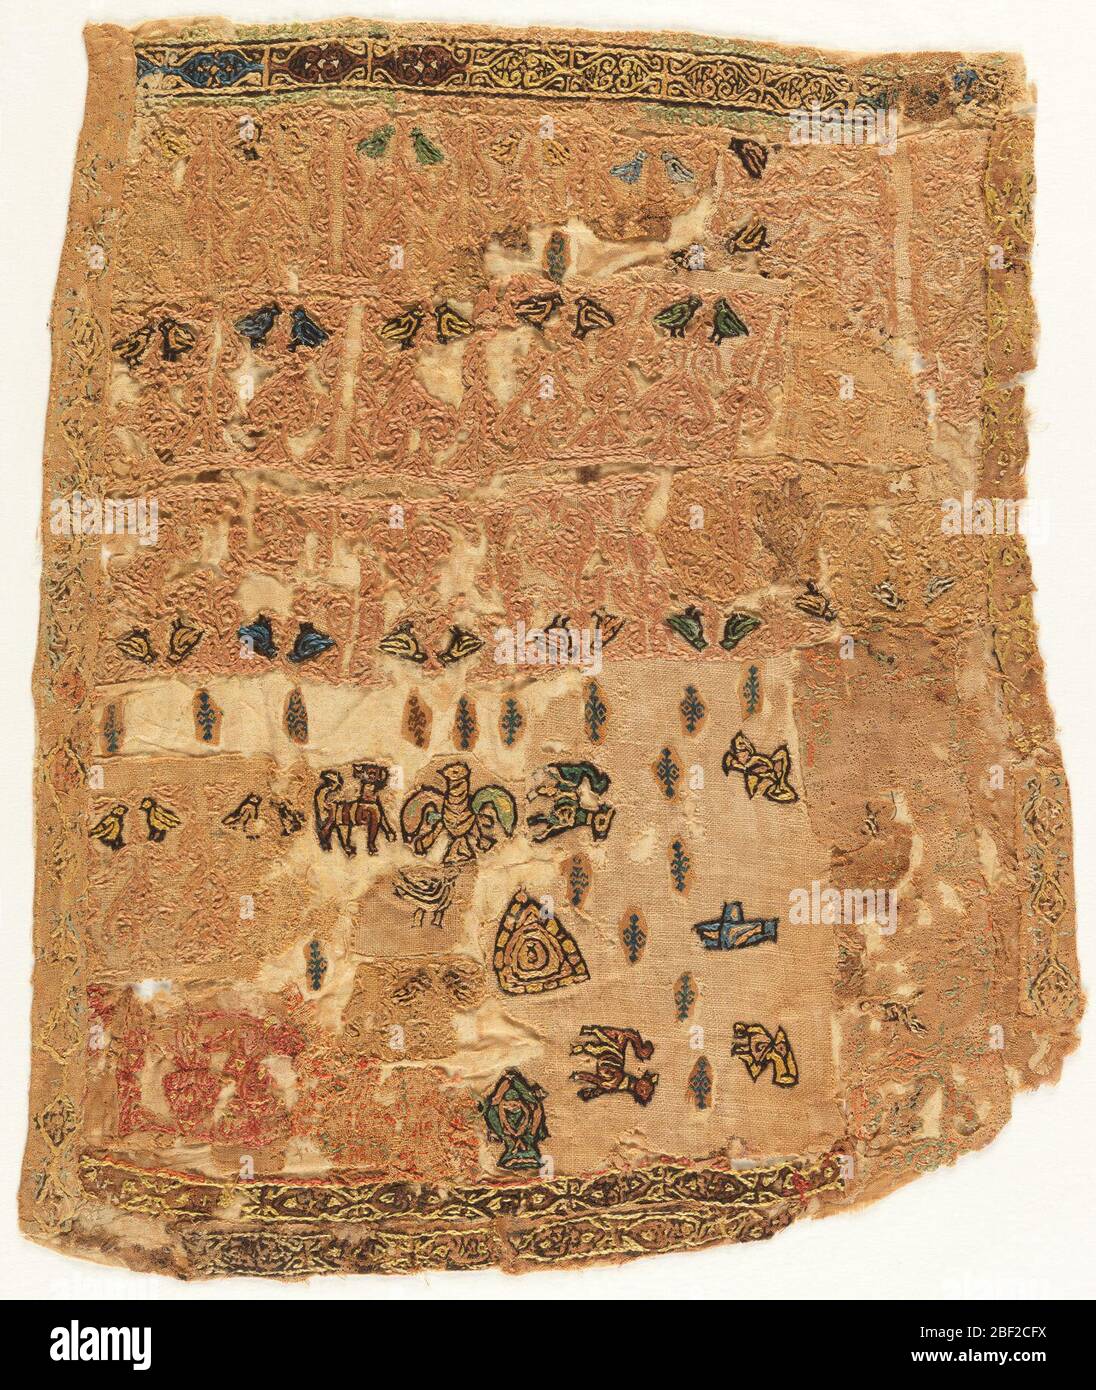 Fragment. Early Islamic embroidery fragment. Silk on linen showing multicolored fish, pairs of birds and other animals embroidered with dark outline. Allover designs of scrolls and palmettes. Scattered geometric ornament in blue. Stock Photo